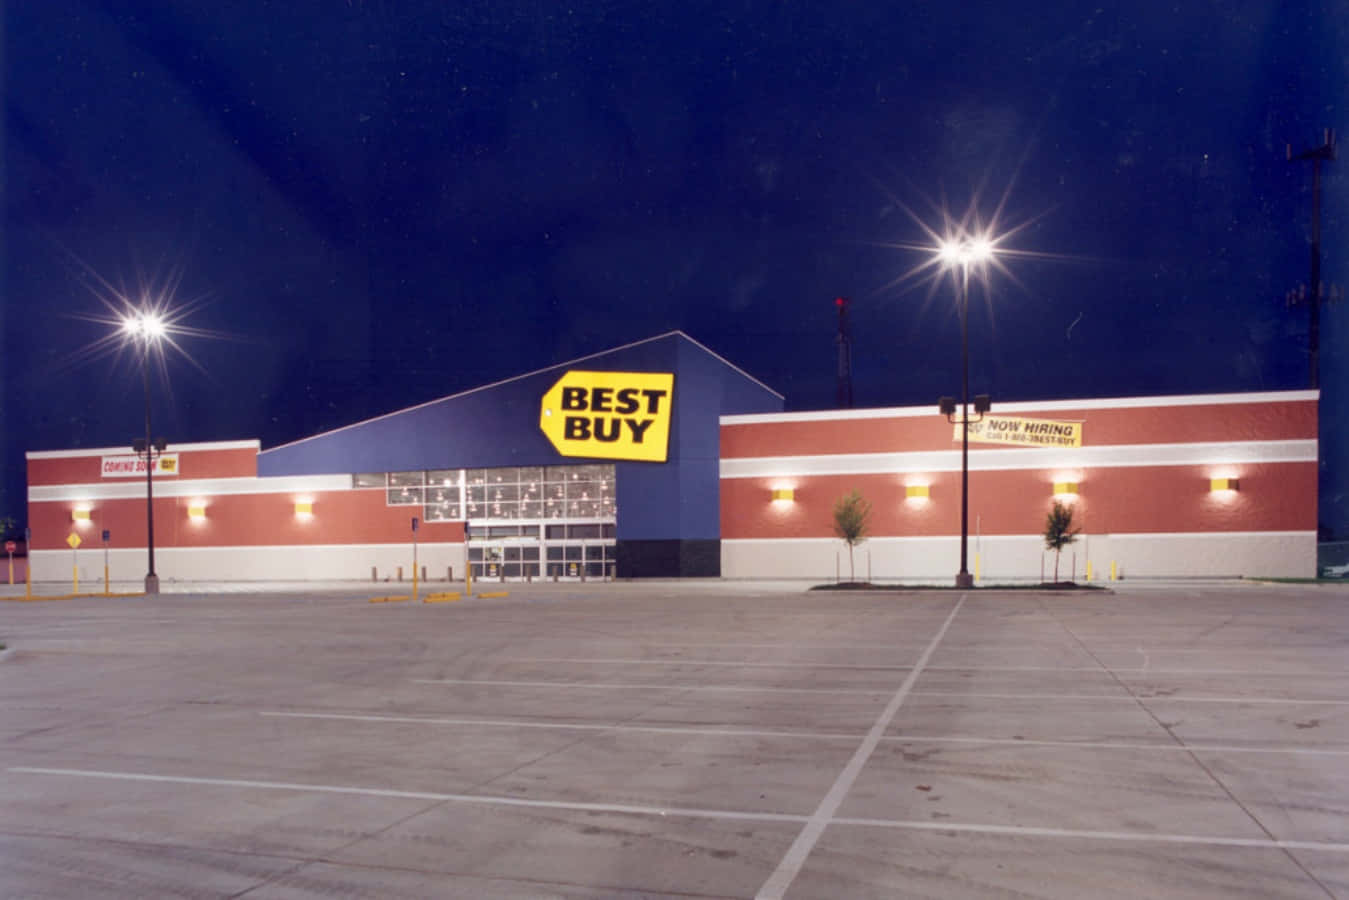 A Best Buy Store At Night With Lights On